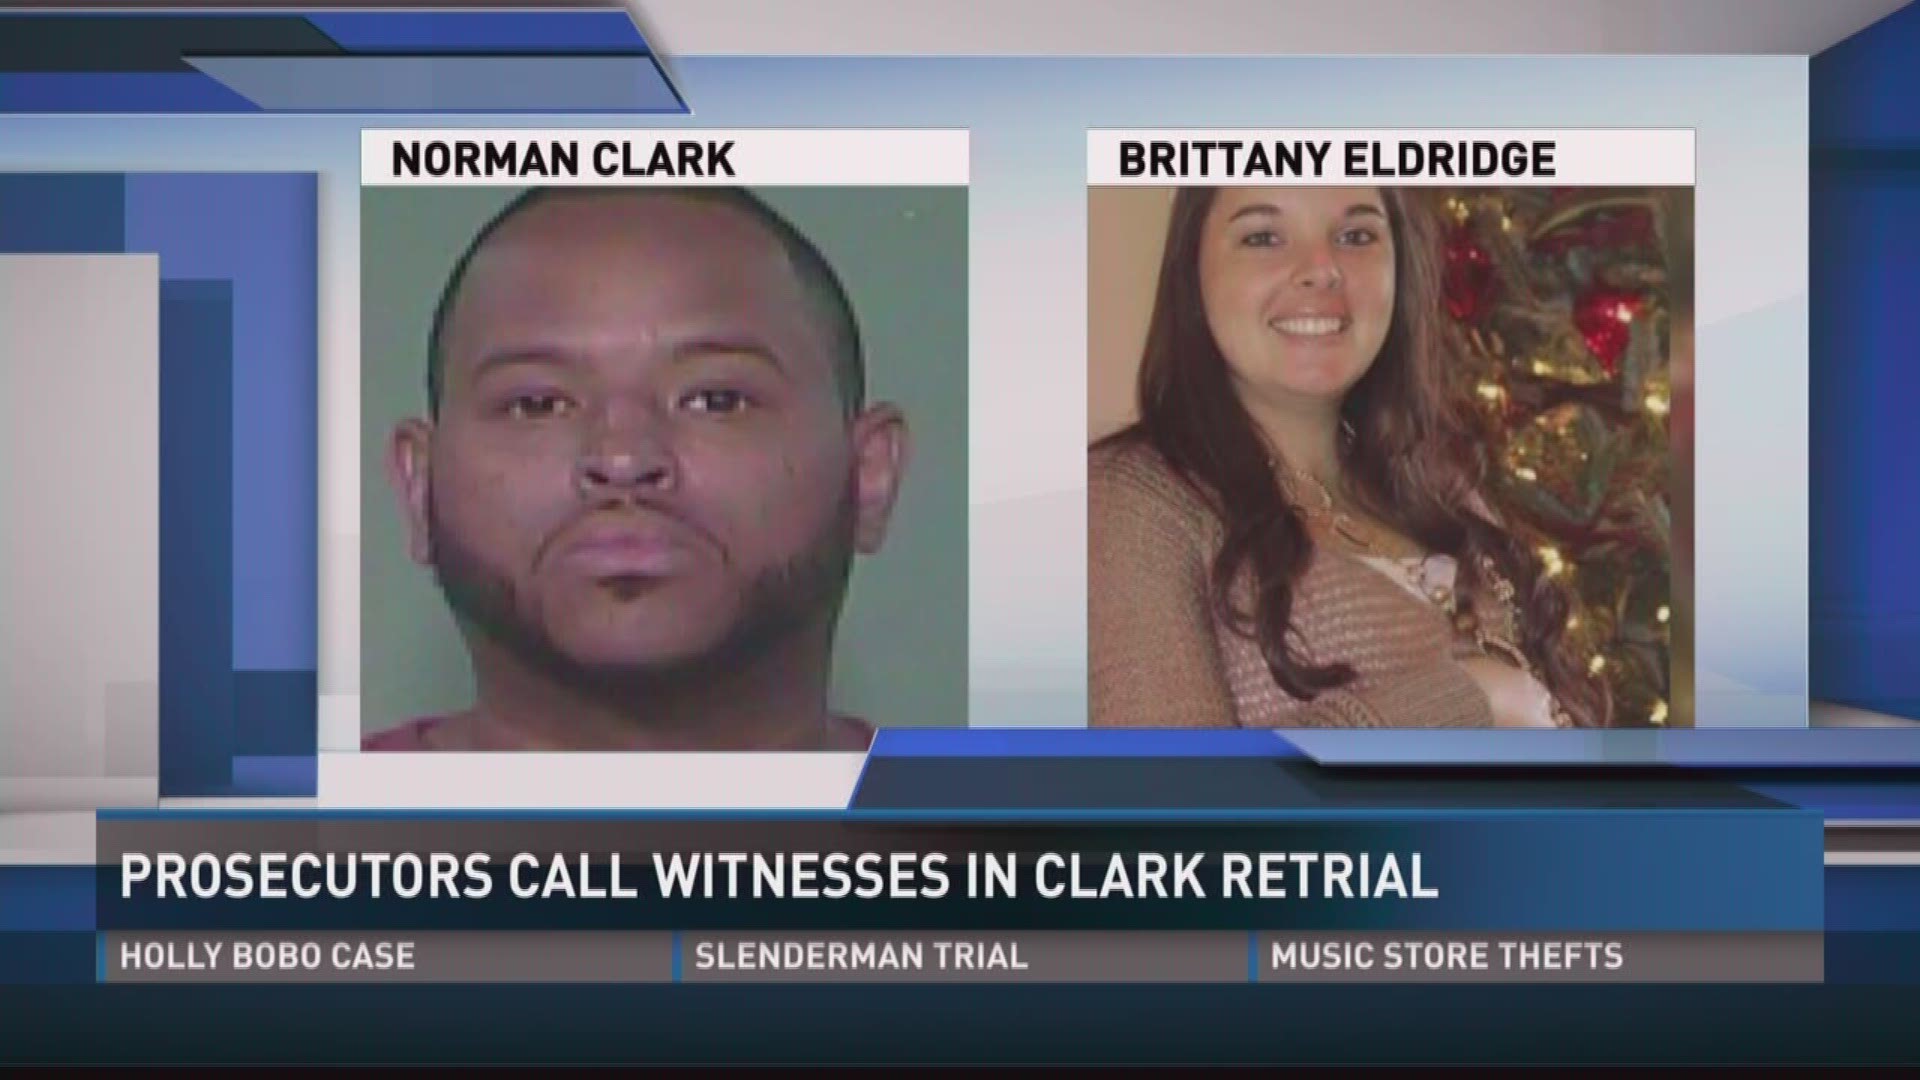 Norman Clark is accused of murdering his pregnant estranged girlfriend. His first trial ended with the jury unable to reach a verdict.